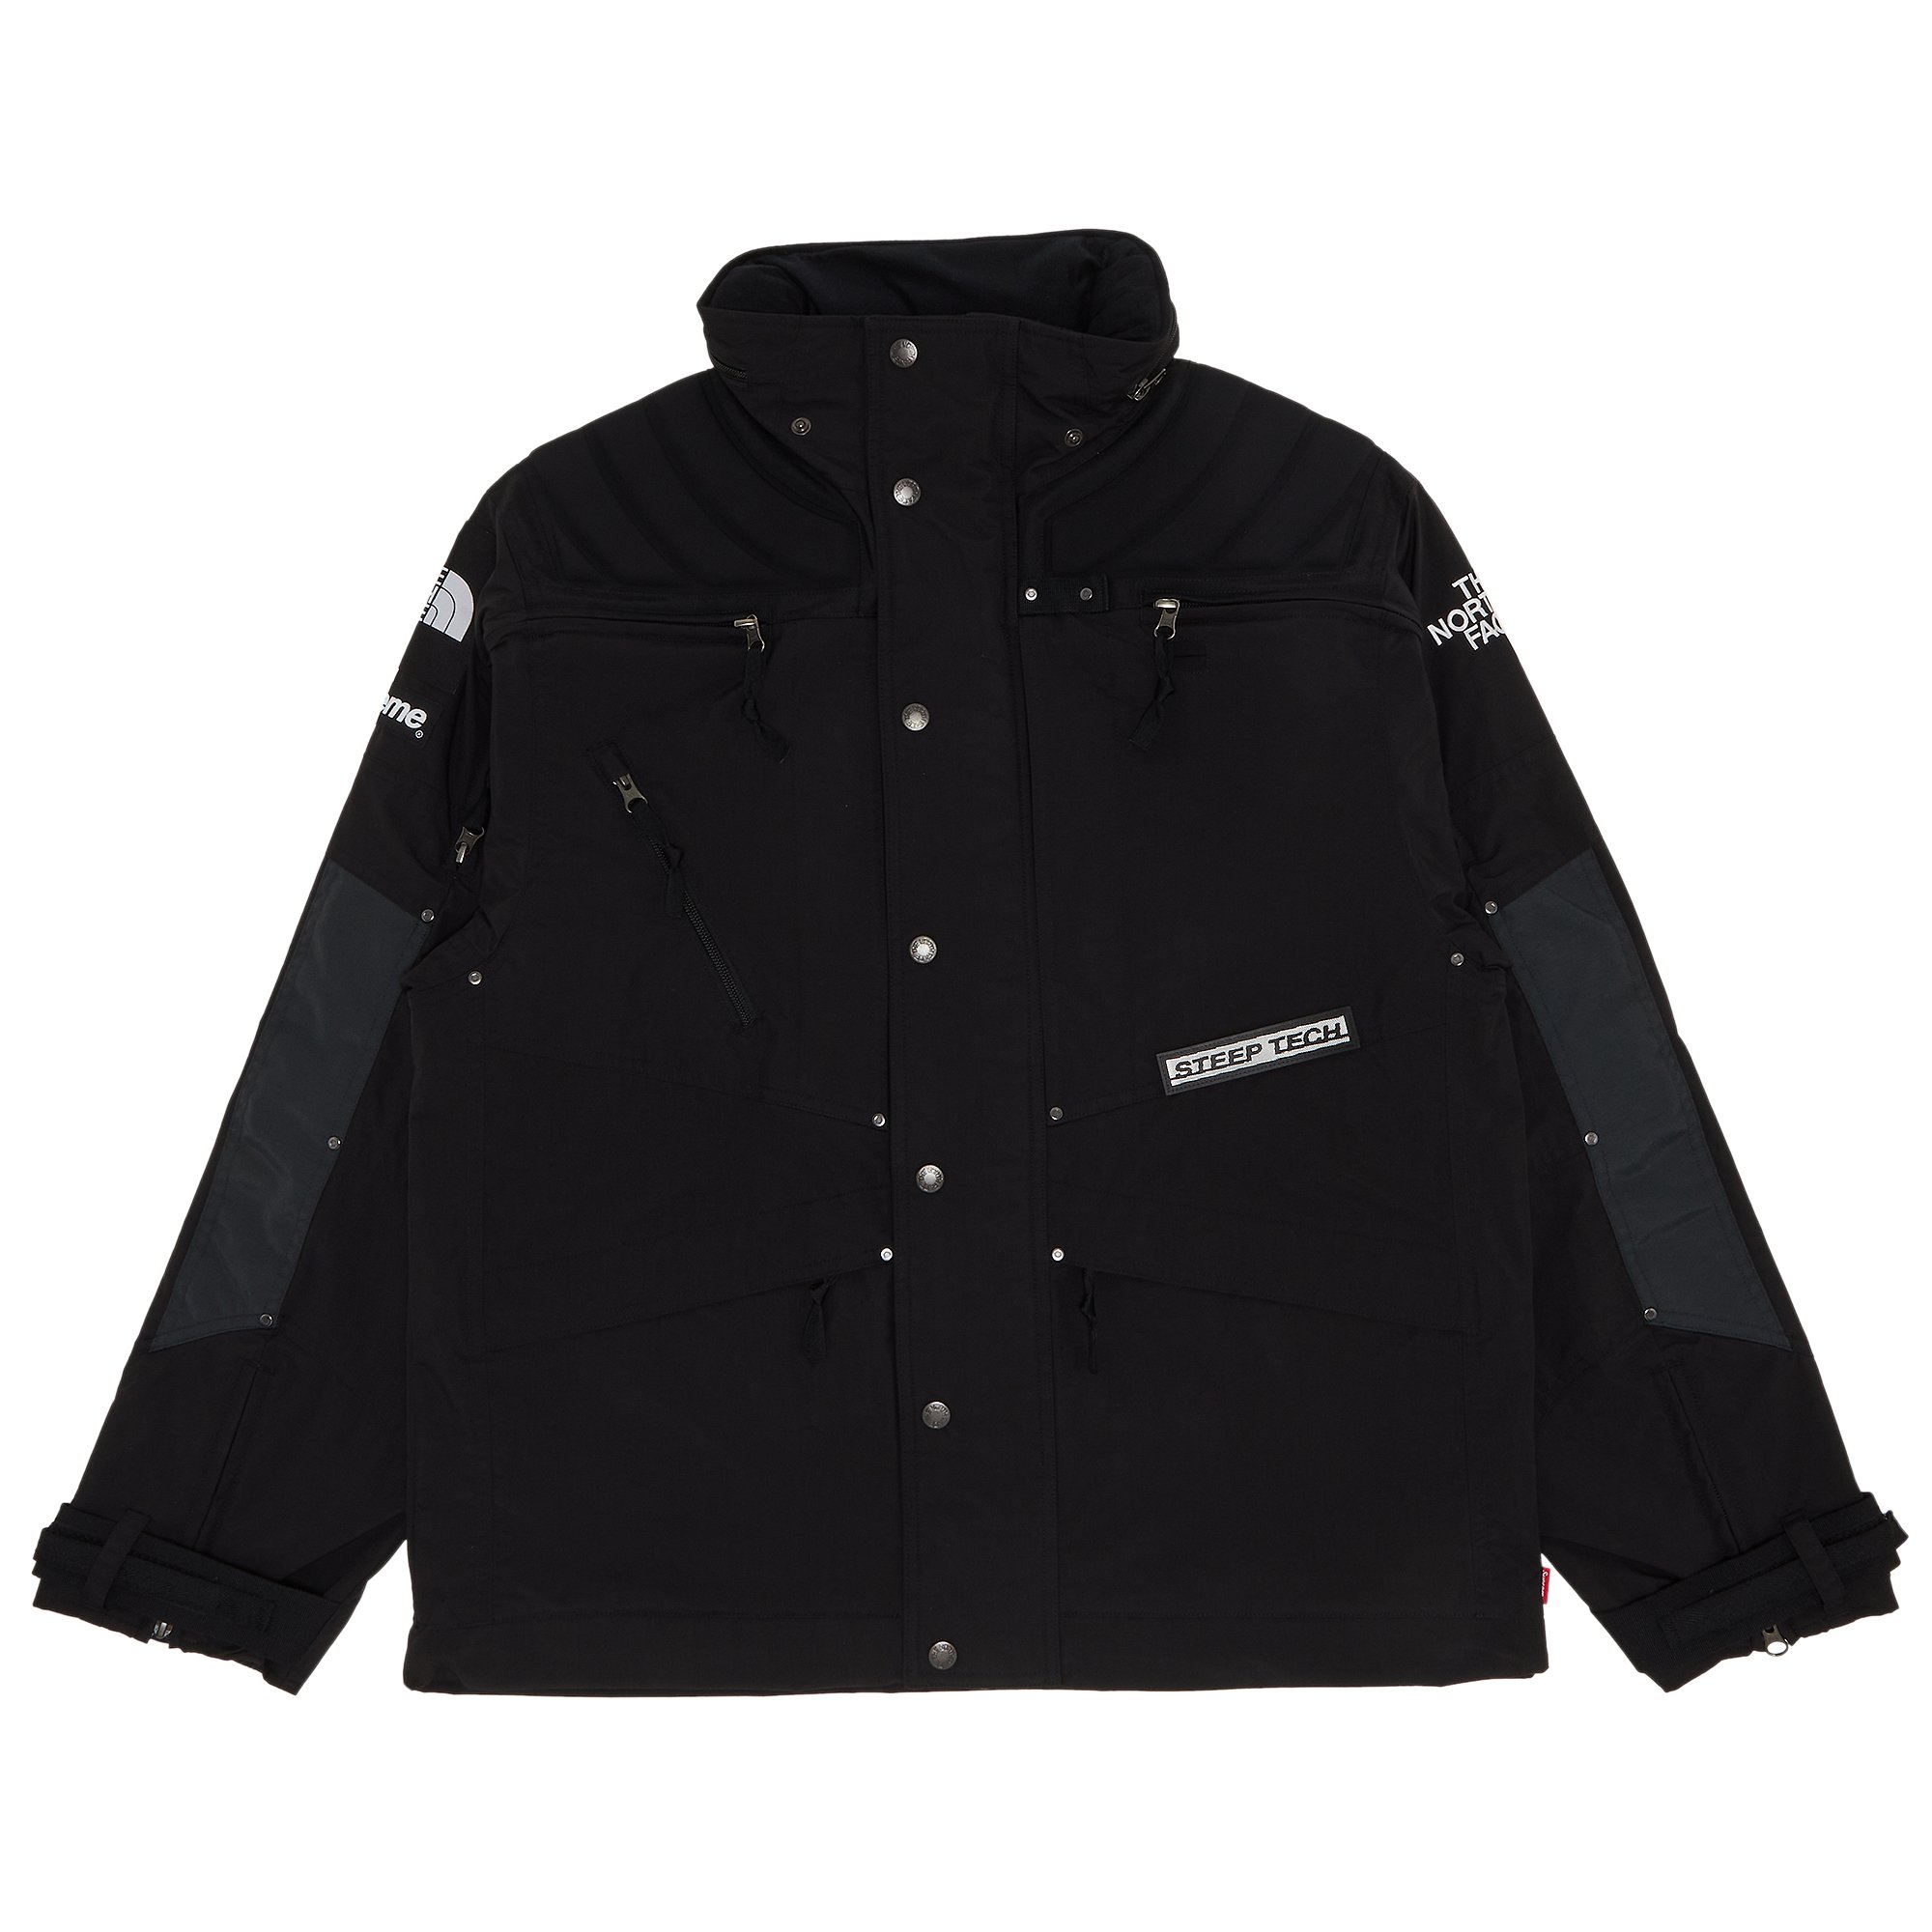 The North Face Steep Tech Apogee Jacket - Nf0a4qyssh21 - Sneakersnstuff  (SNS)